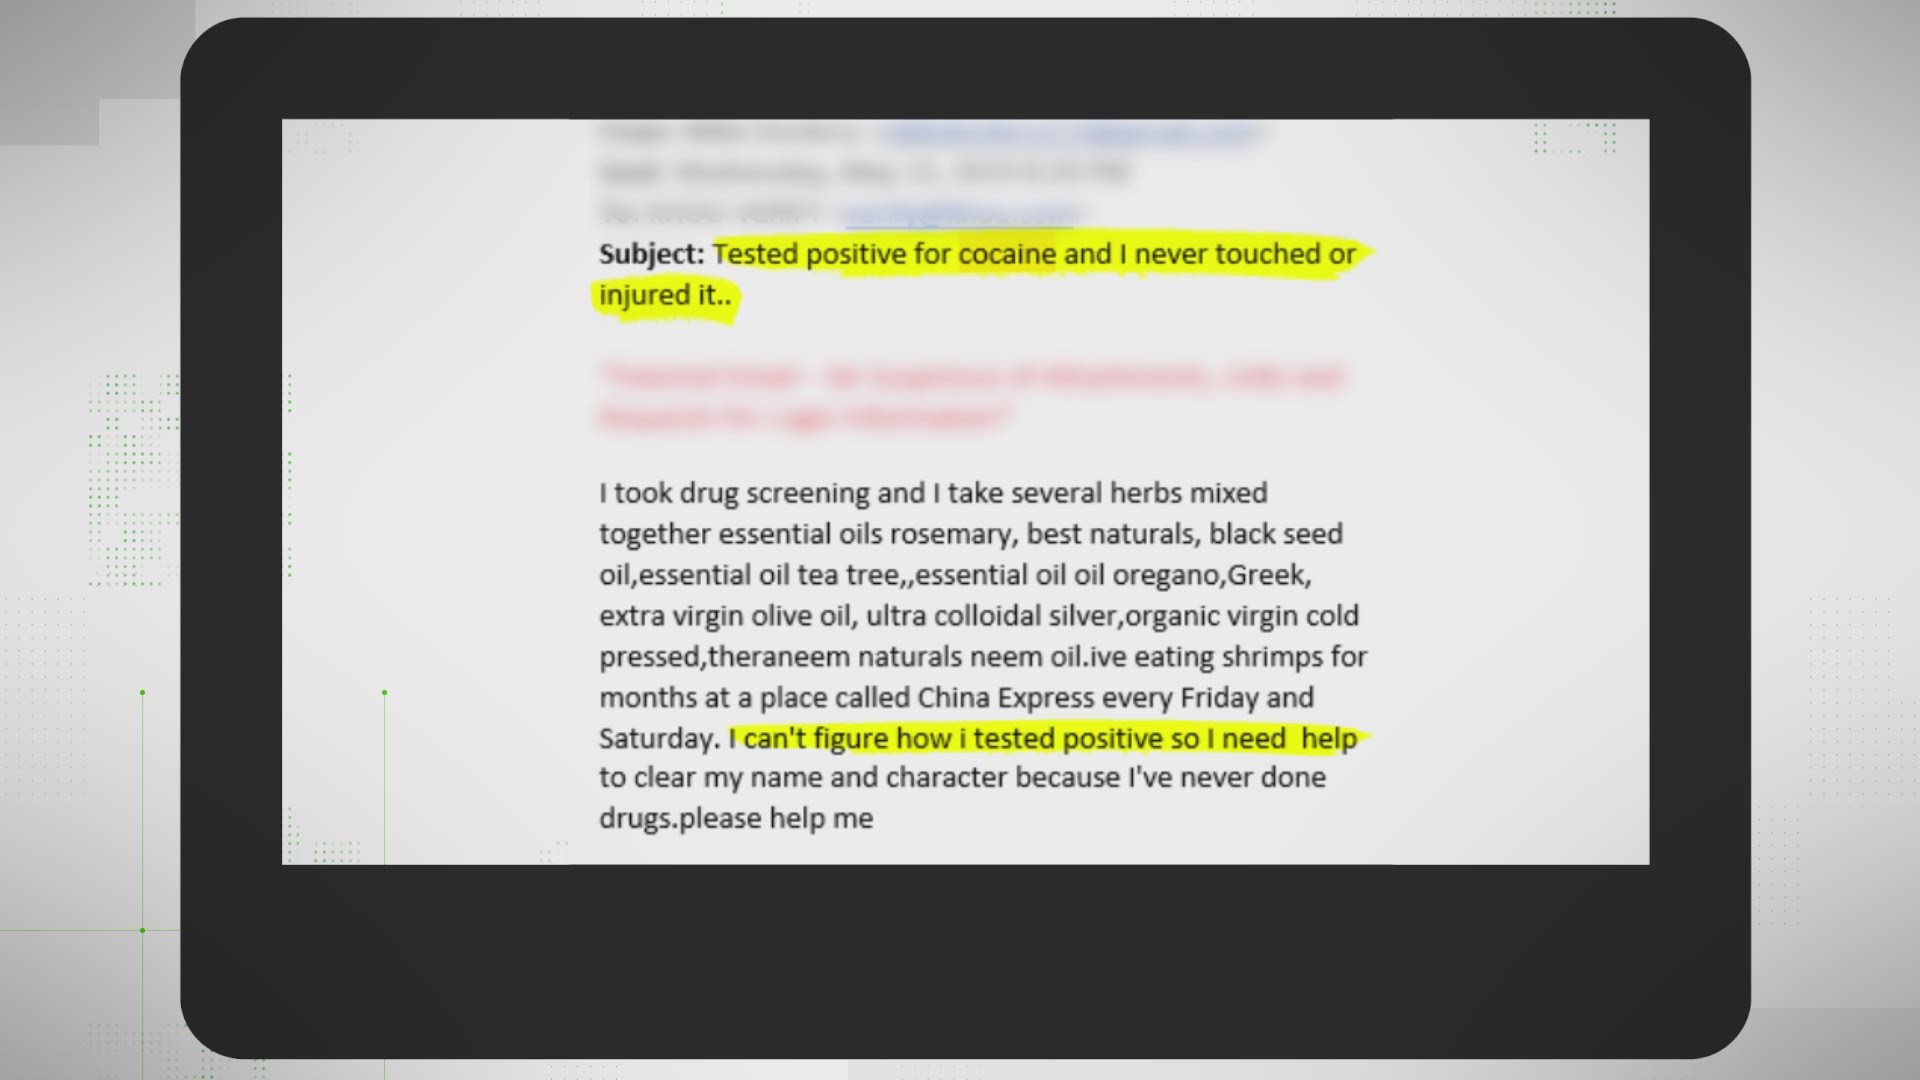 Viewer Nikki D. said she'd tested positive on a drug test for a drug she never used. She asked if it could be because of something she ate? We verified.